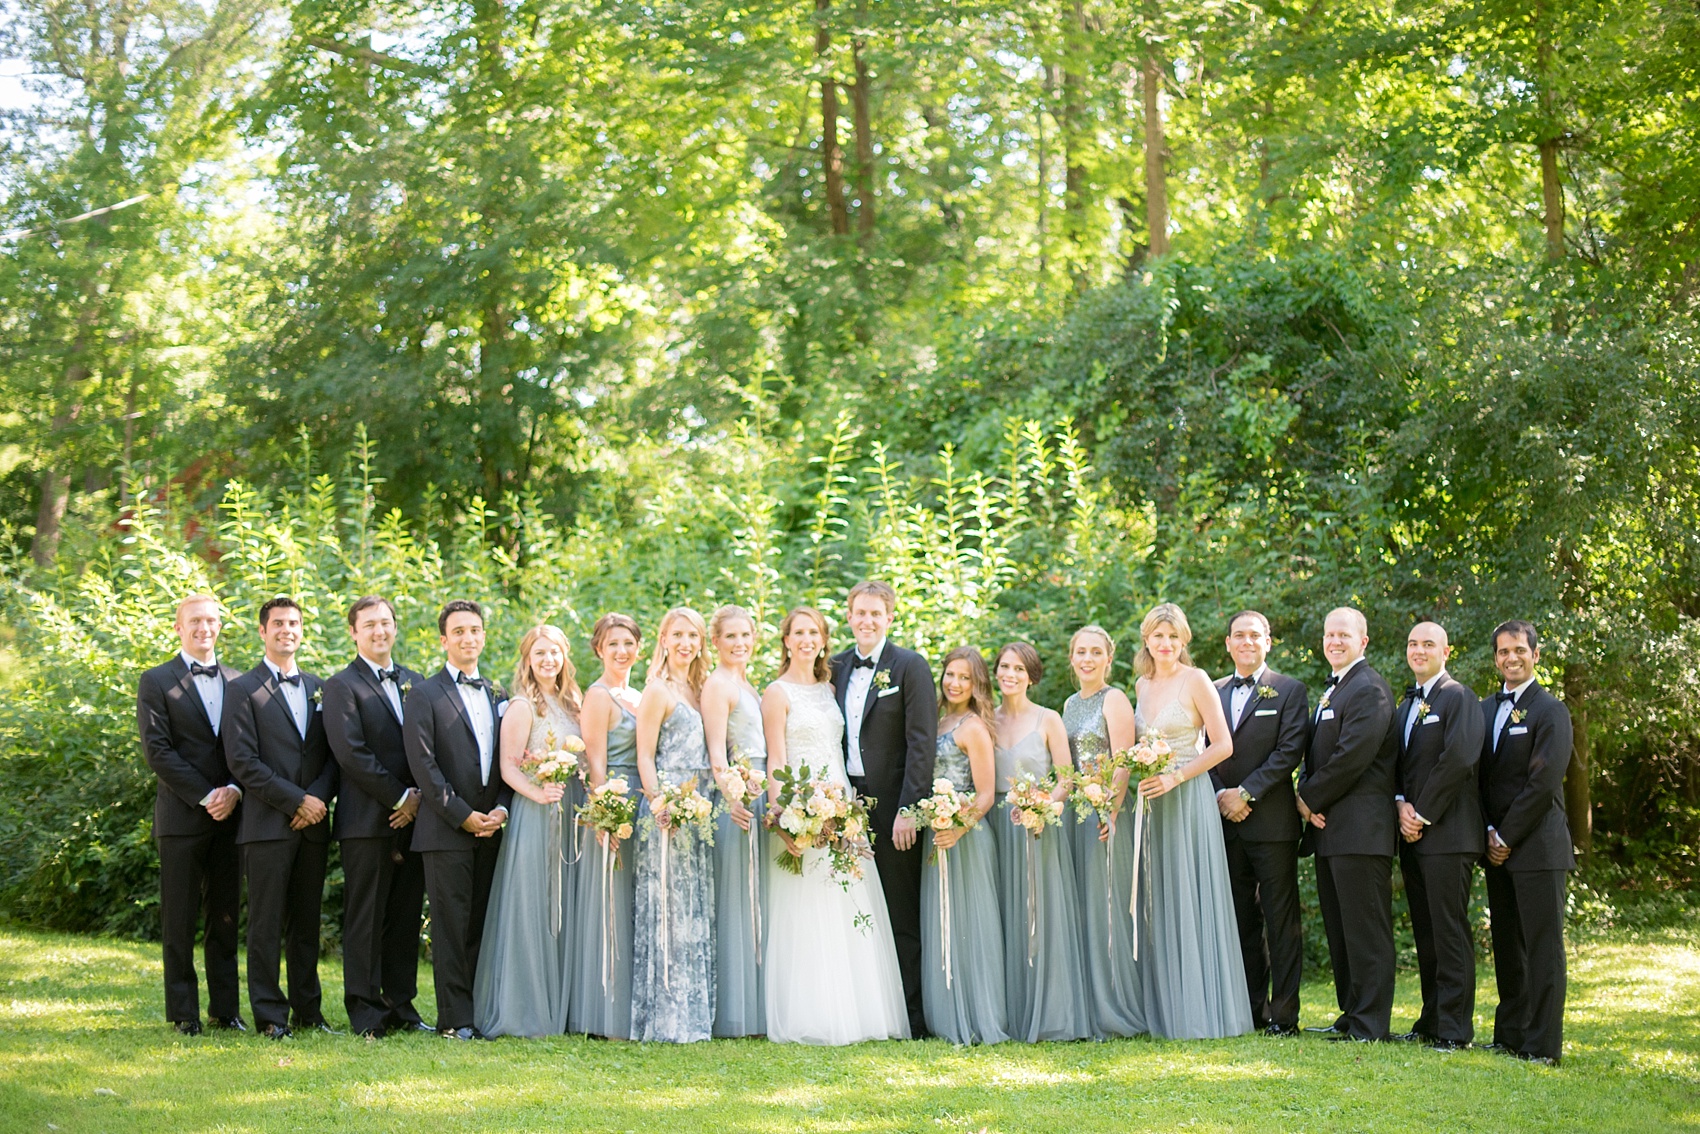 Mikkel Paige Photography photos from a wedding at Southwood Estate in Germantown, New York. Picture of the bride and groom with their wedding party. The bridal party wore mismatched blue gowns.